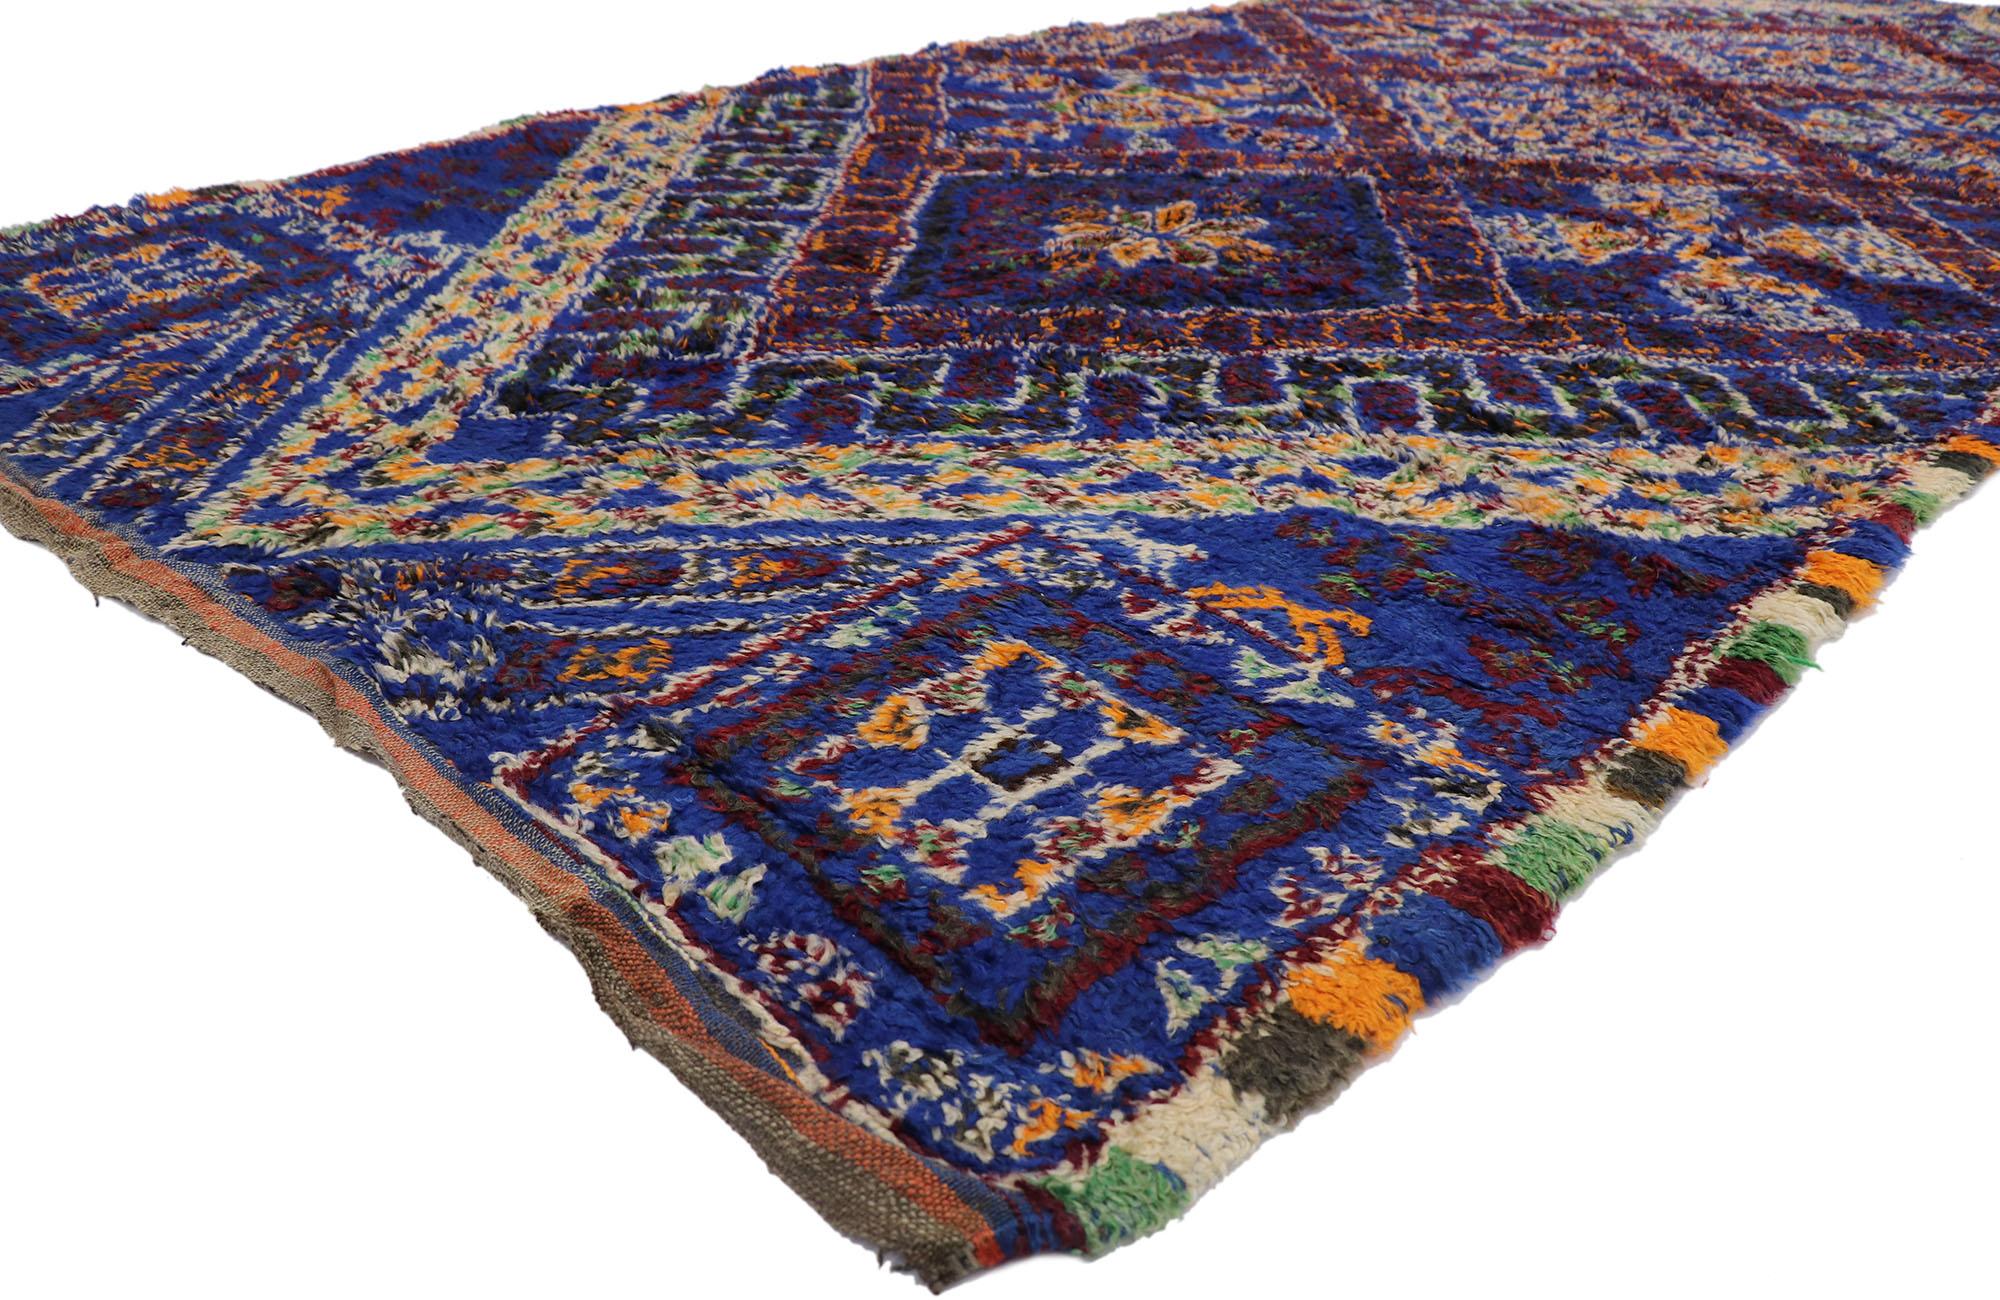 21331 Vintage Blue Moroccan Rug, 06'01 x 13'07. Modern style meets nomadic charm in this hand knotted wool blue Moroccan rug. The eye-catching tribal design and lively colors woven into this piece work together creating a rustic yet refined look.